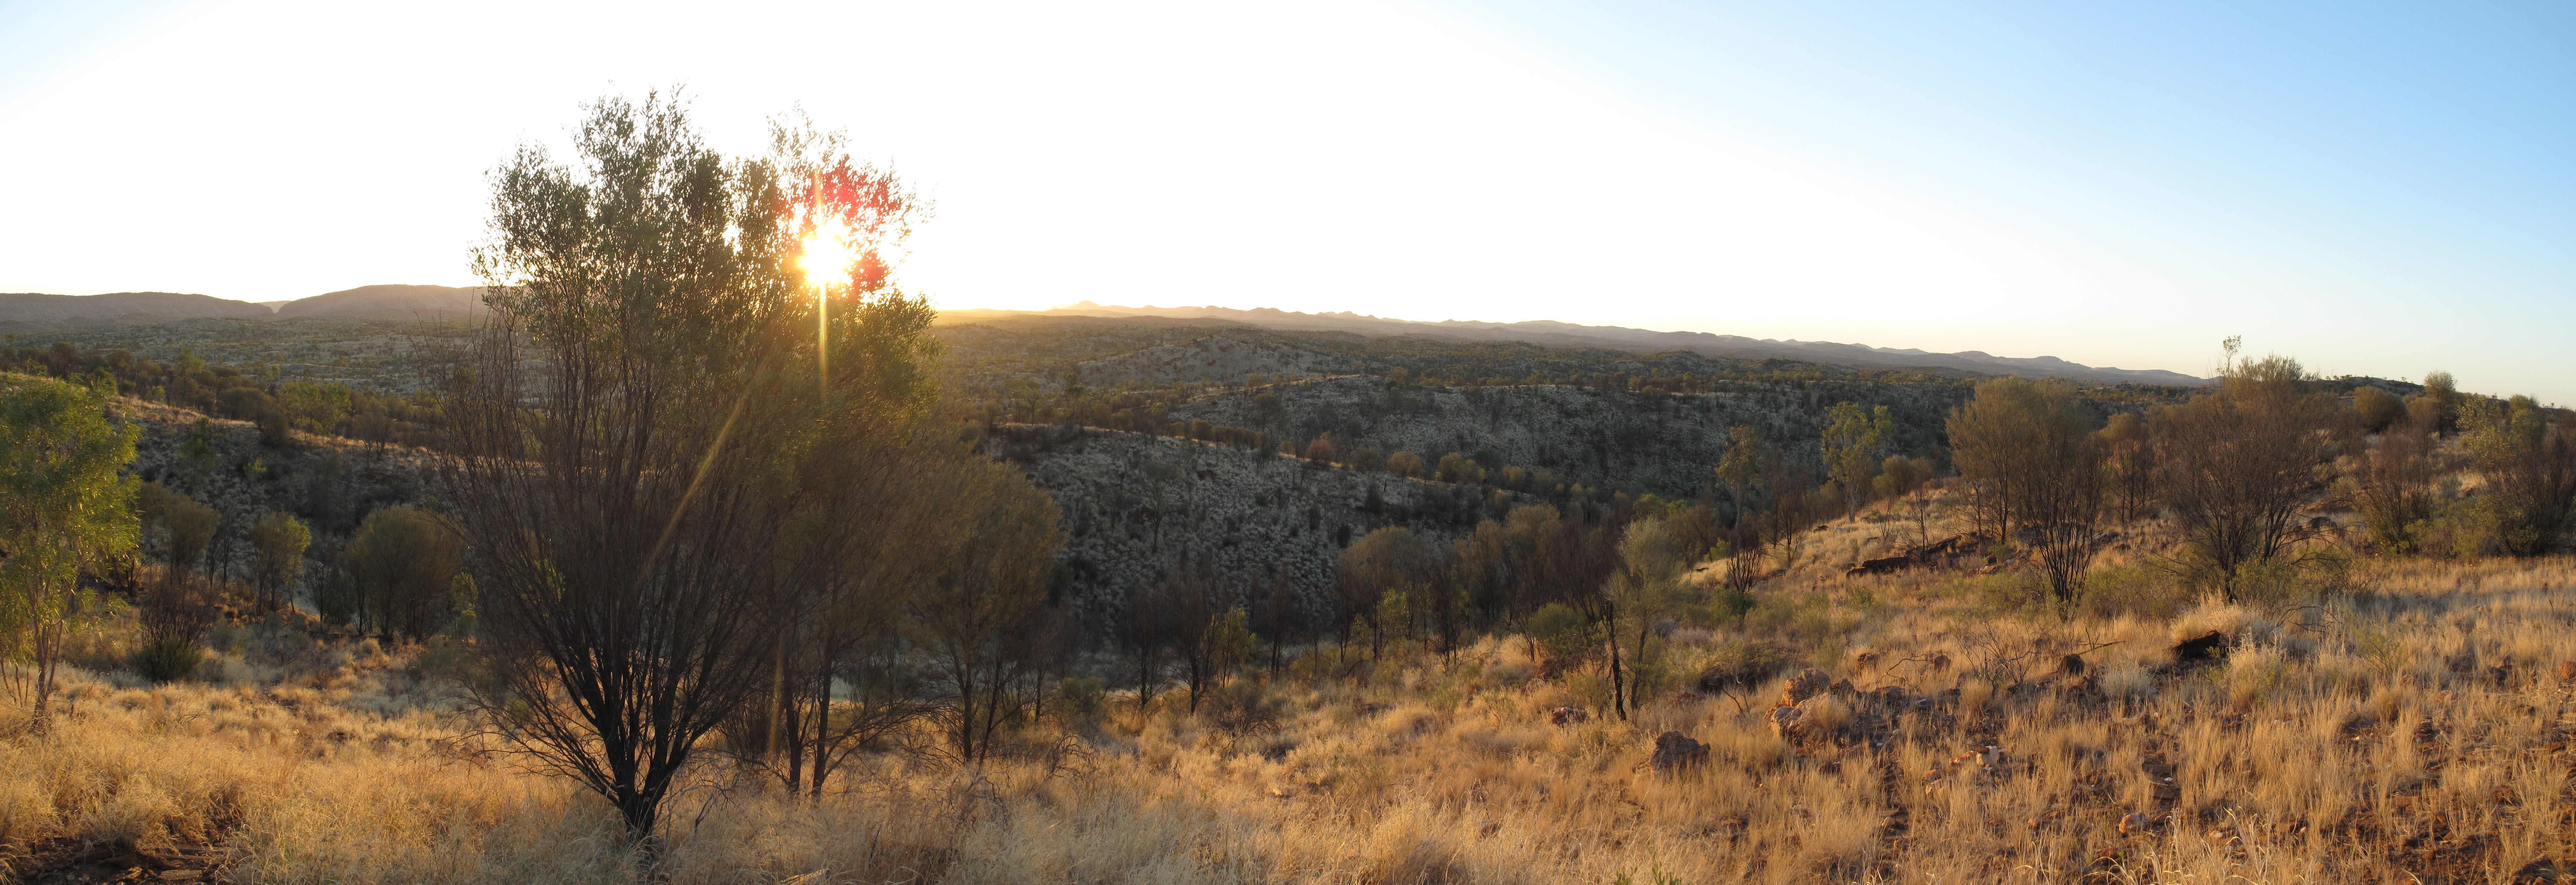 alice springs, nt, australia, outback, panorama, northern territory